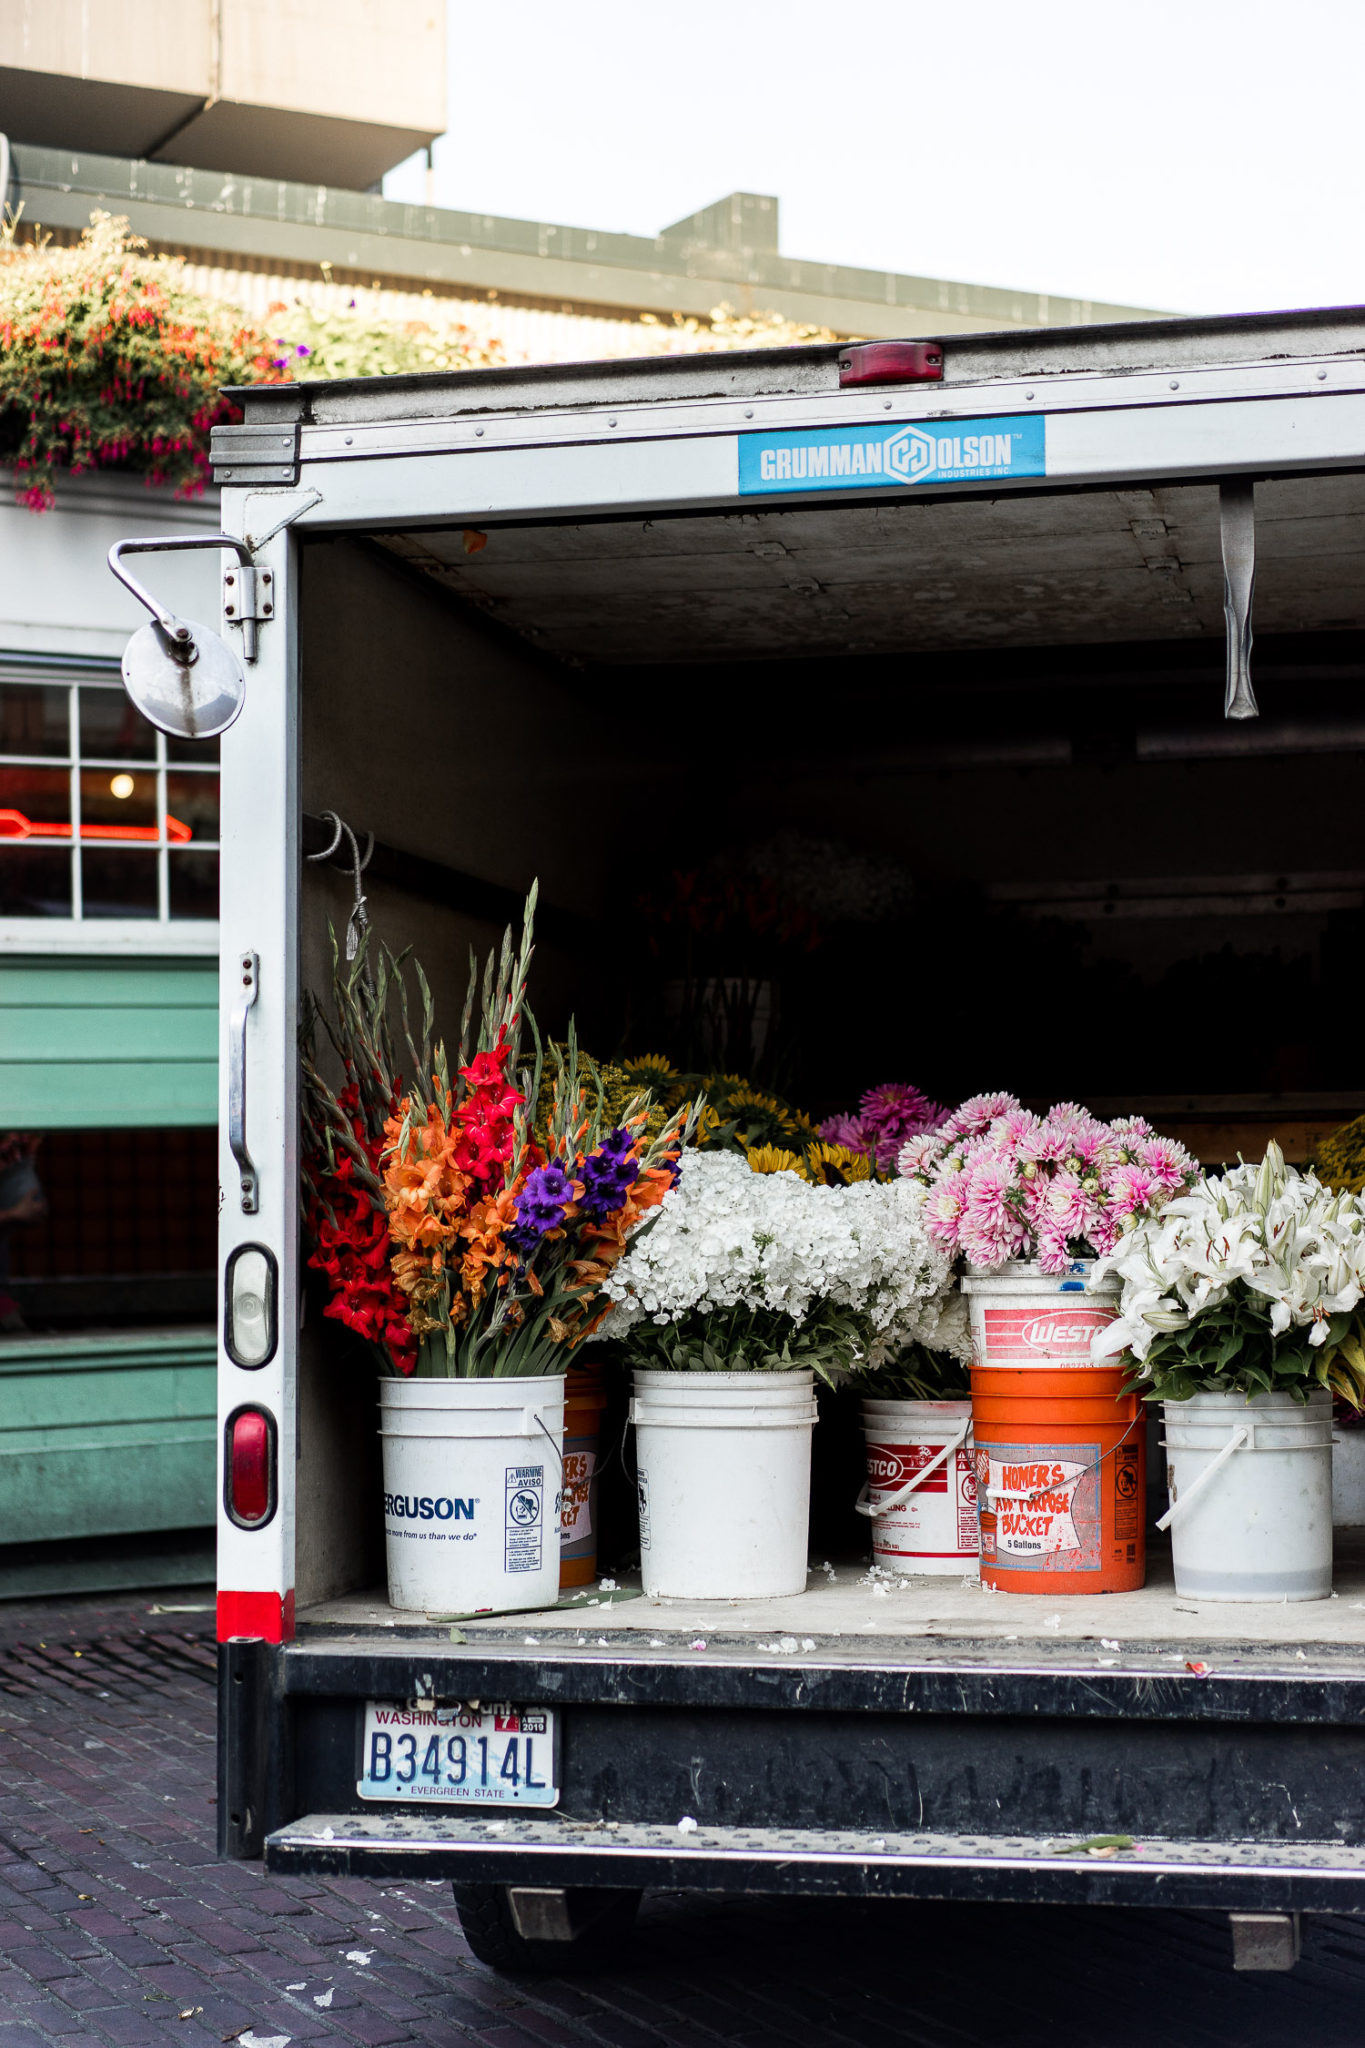 Pretty florals on display at Pikes Peak Public Market in Seattle, caught by A Glam Lifestyle blogger